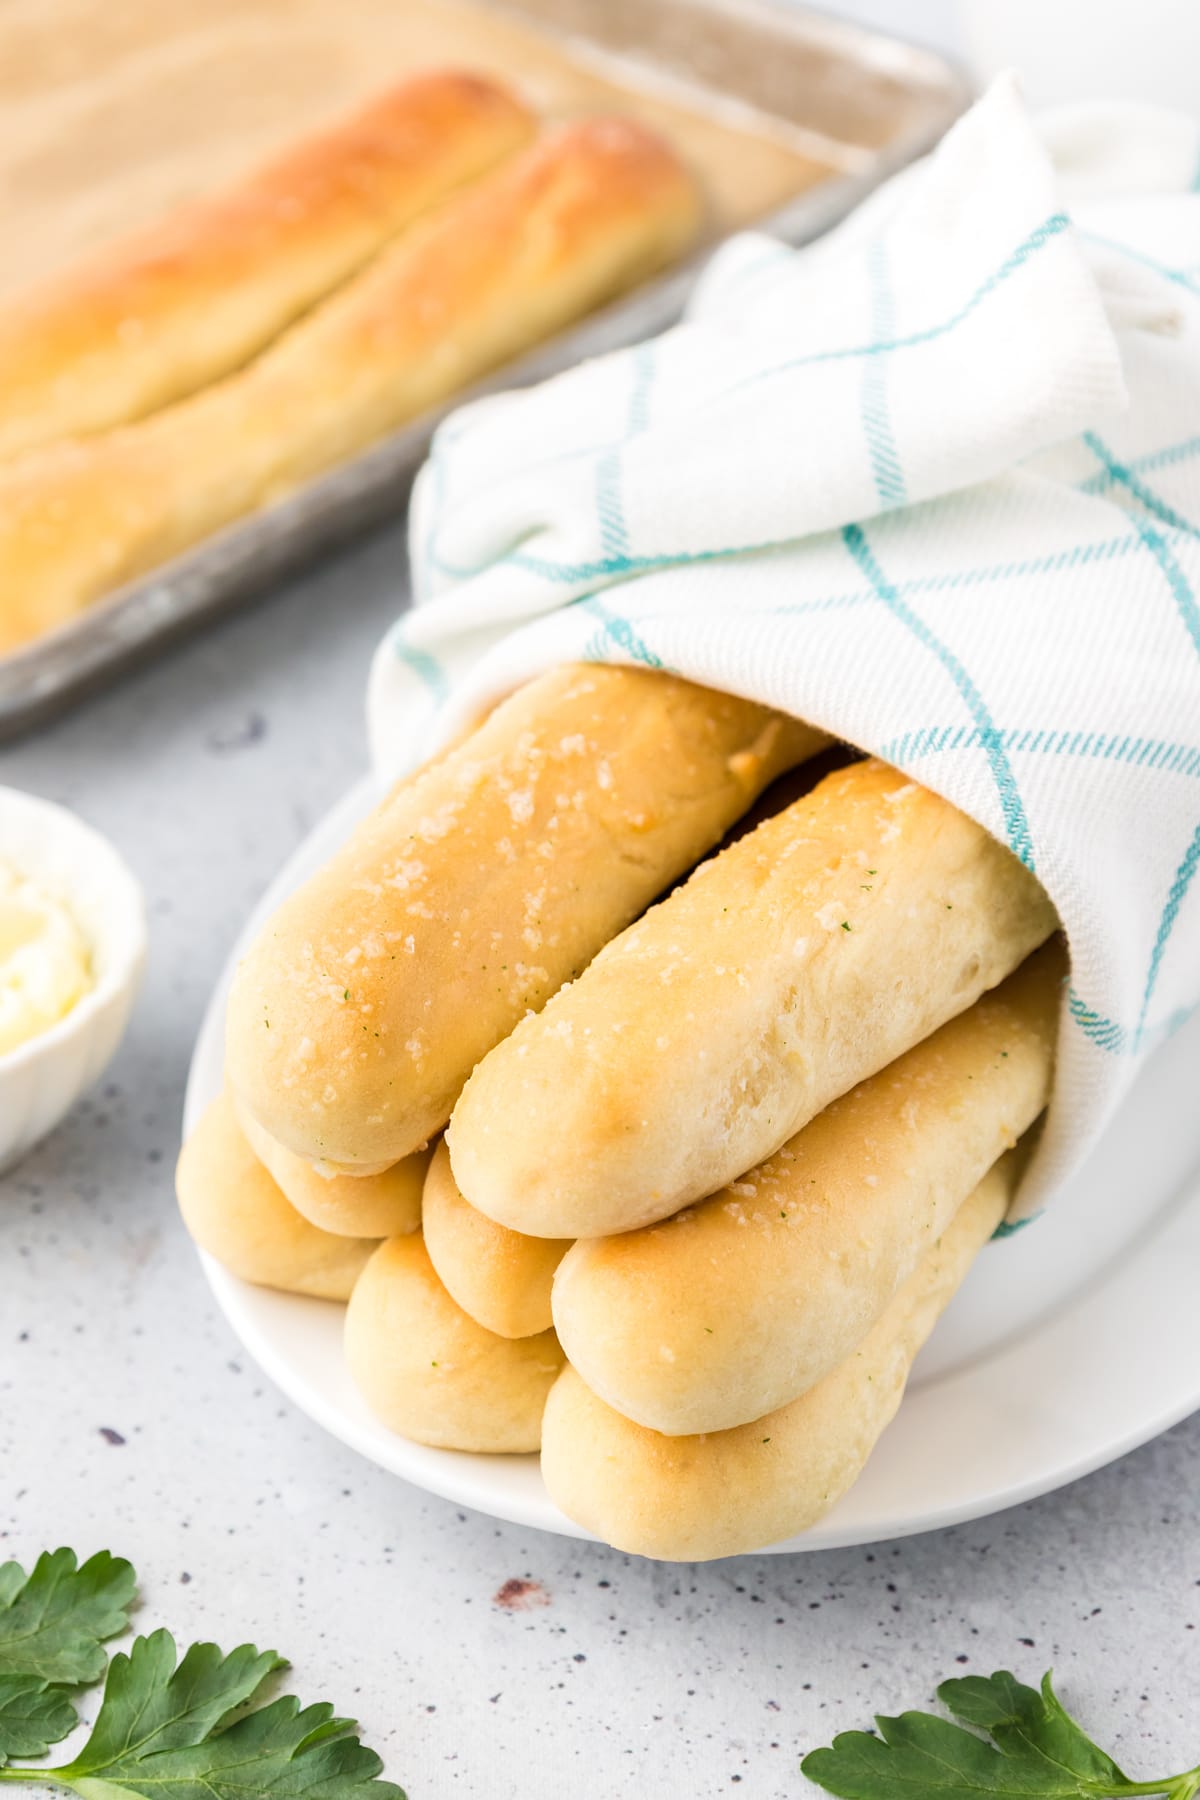 Homemade Olive Garden breadsticks wrapped in a towel on a plate